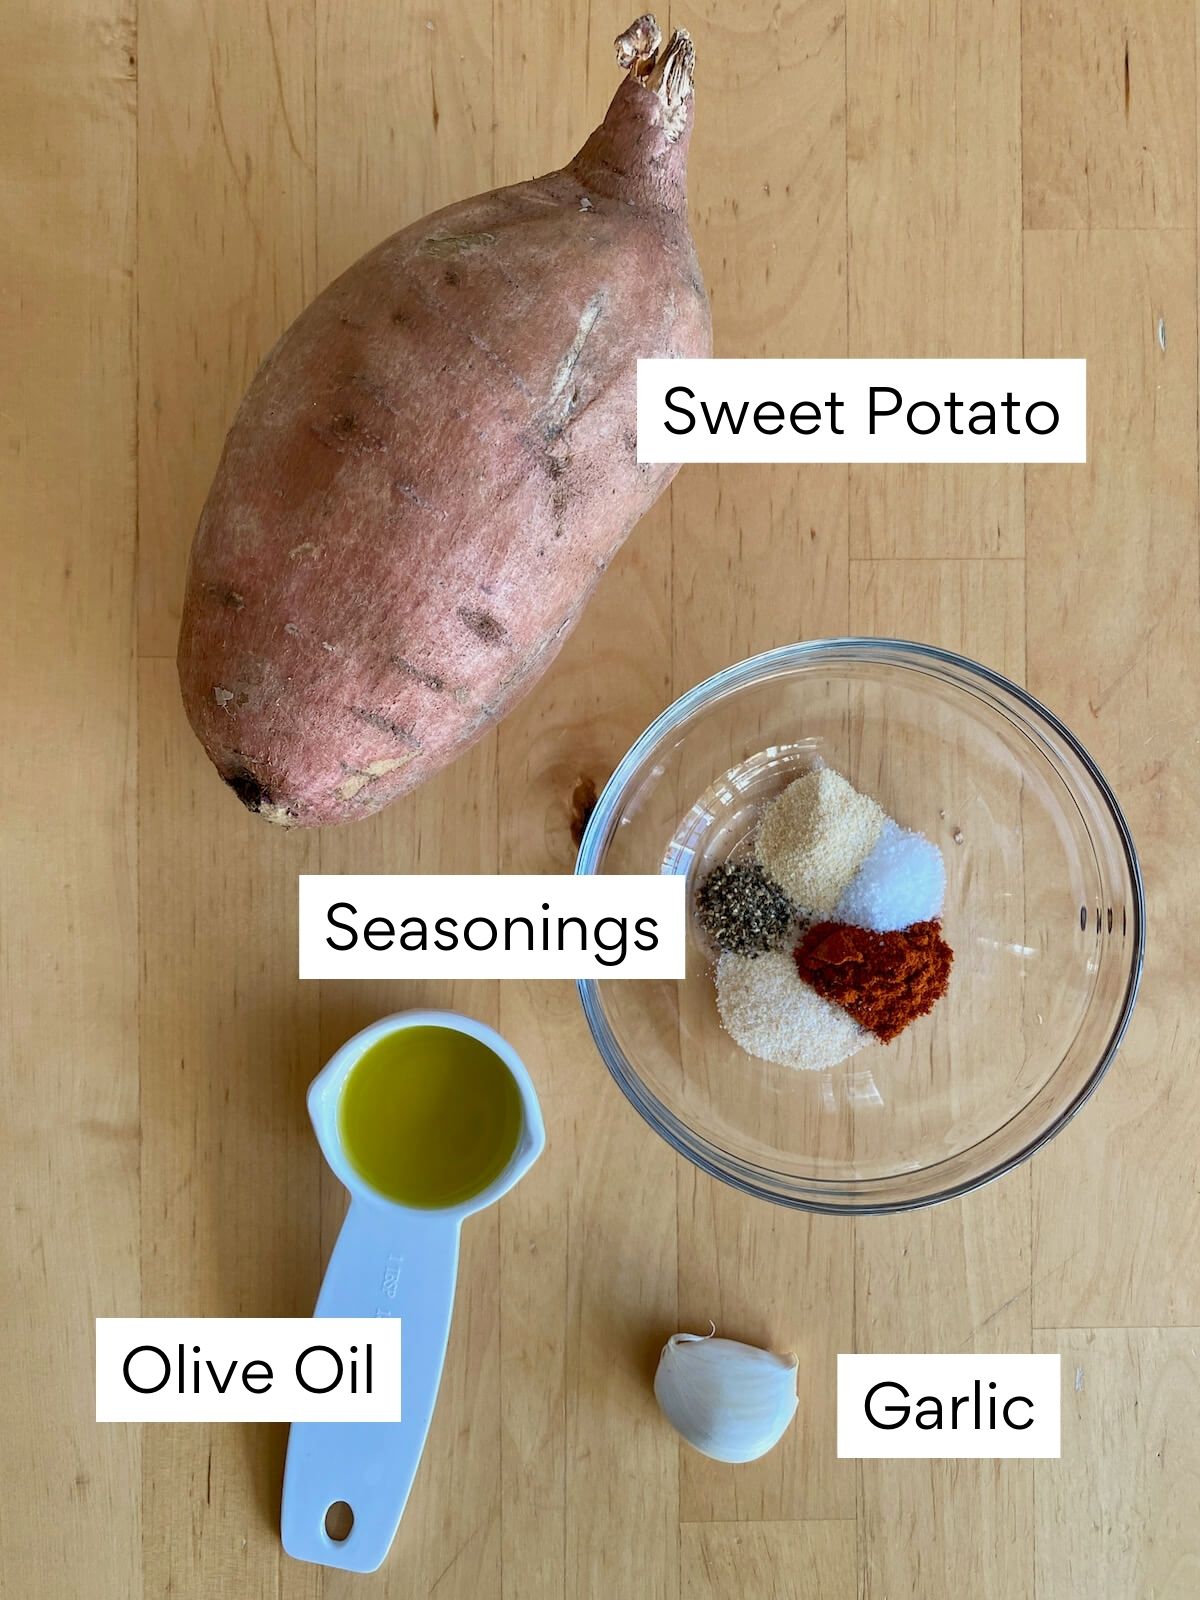 The ingredients to make sautéed sweet potatoes on a butcher block countertop. Each ingredient is labeled with text. They include sweet potato, seasonings, olive oil, and garlic.